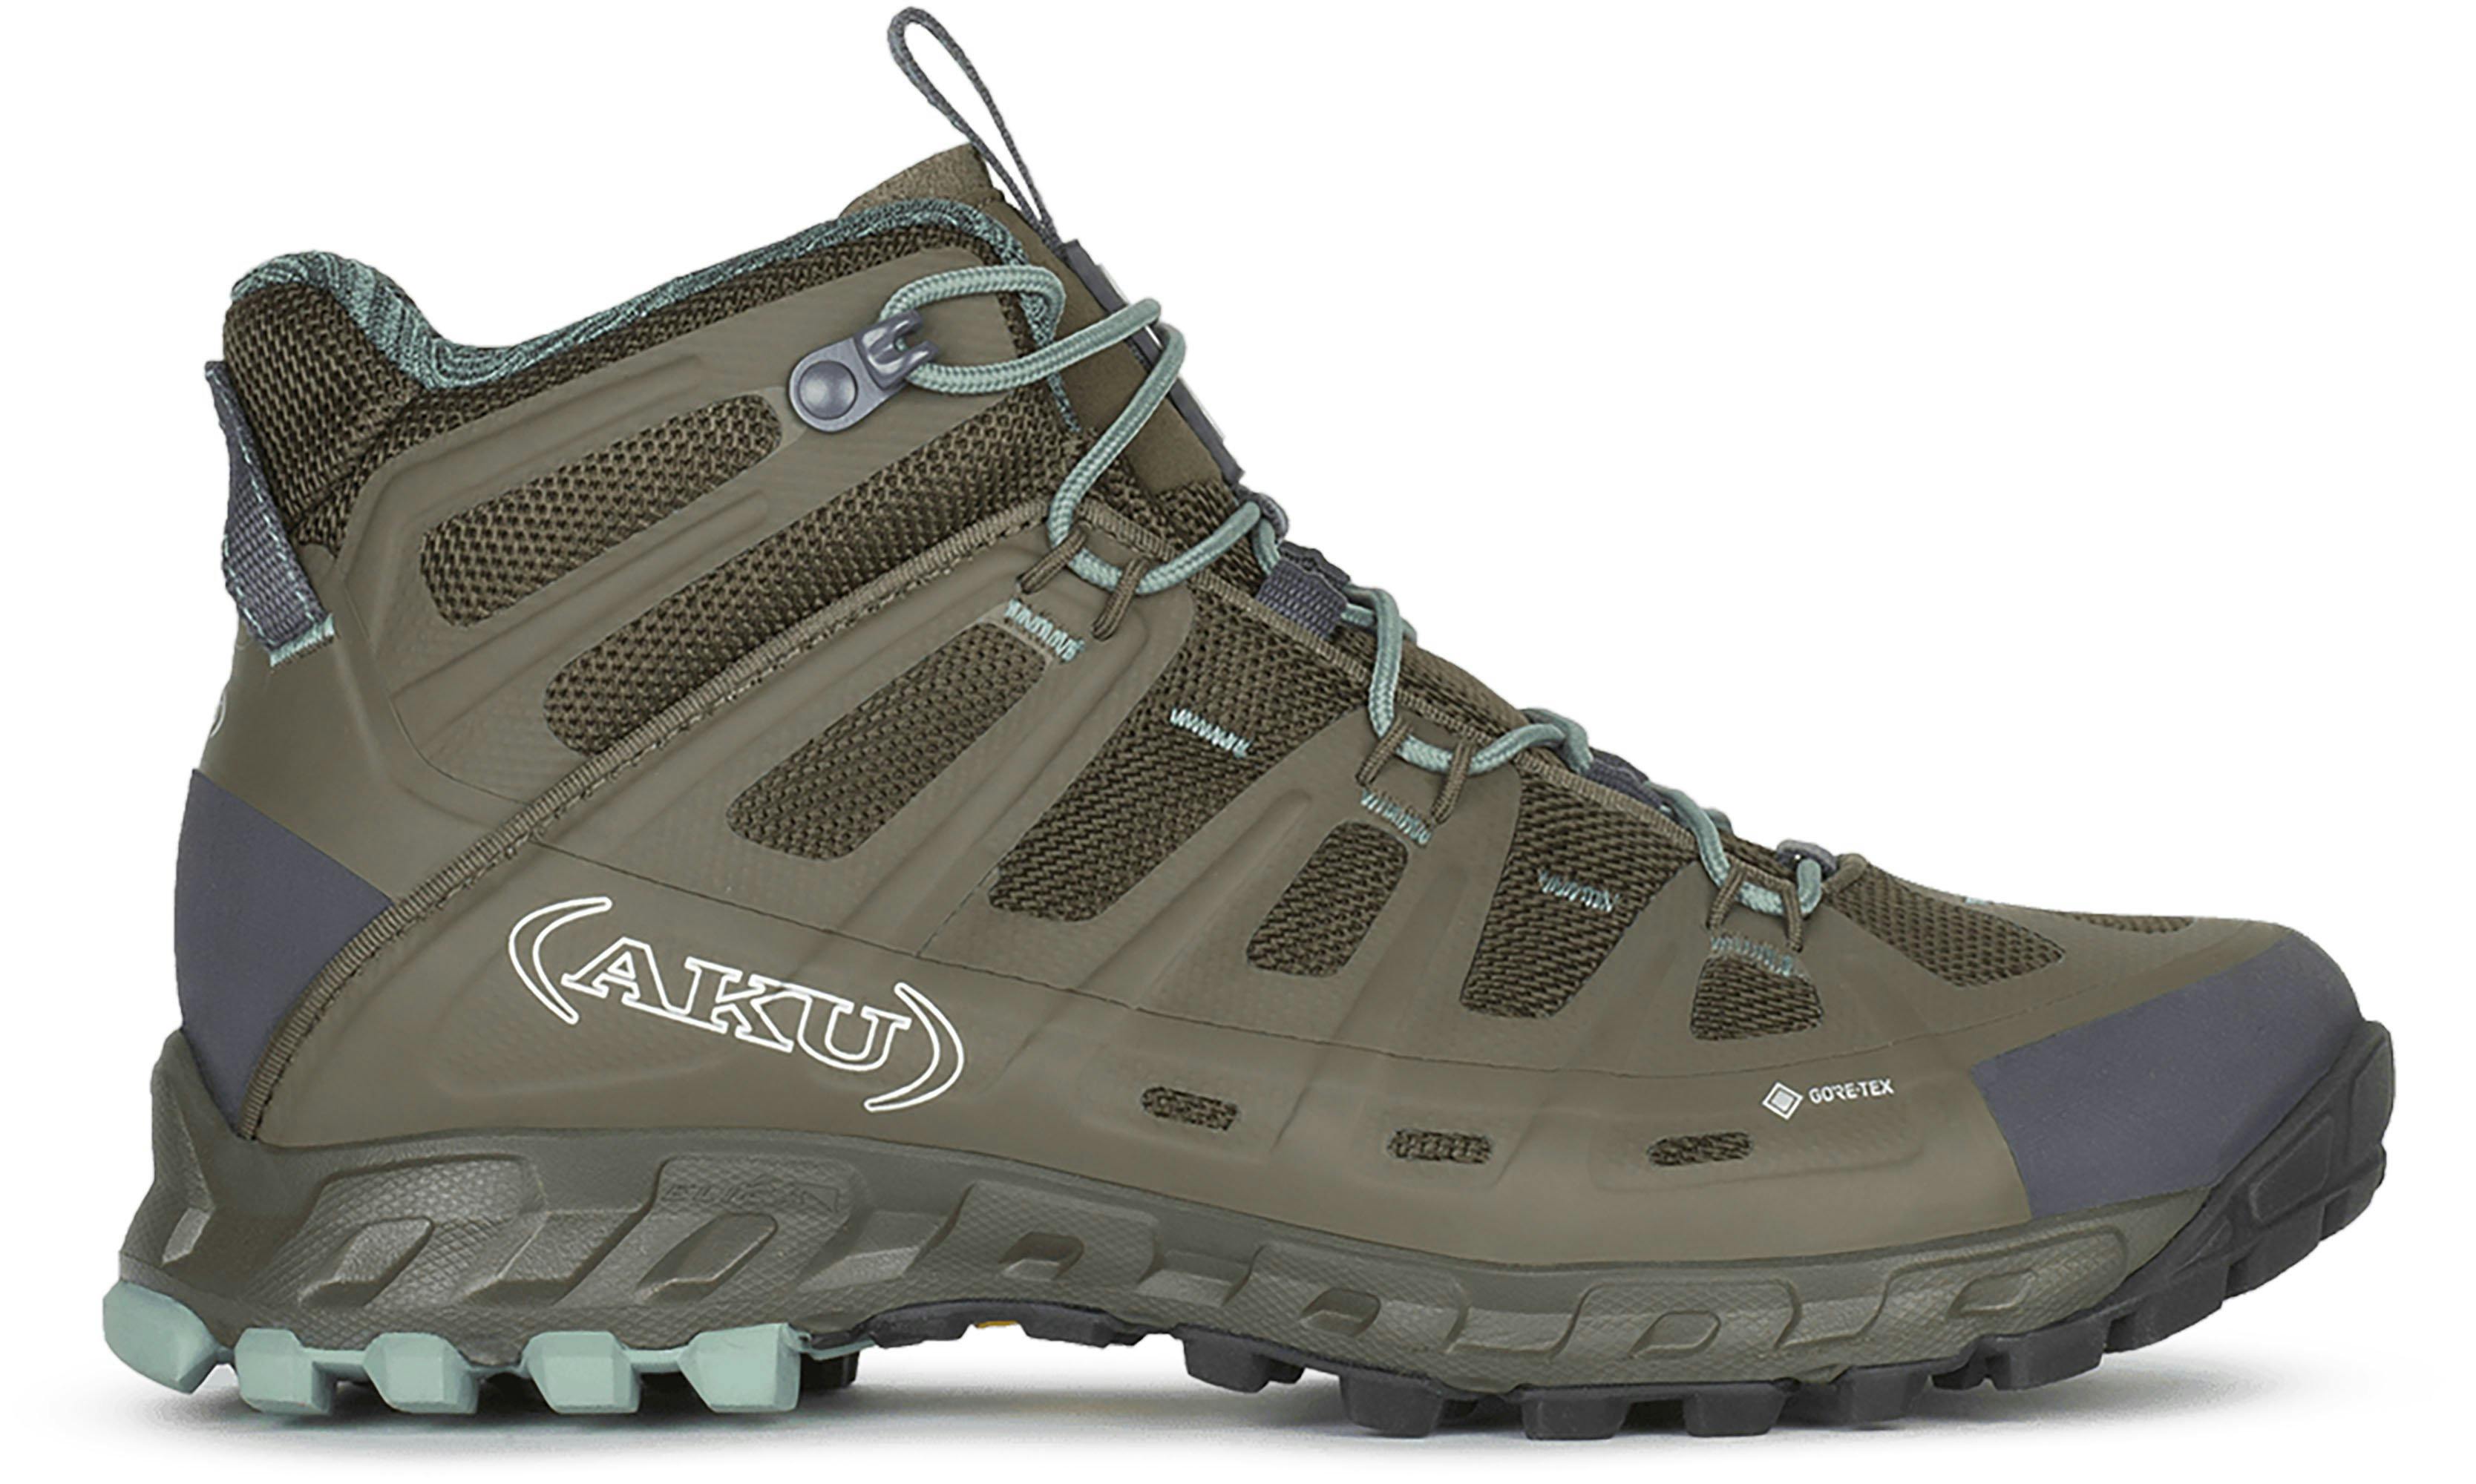 Product image for Selvatica Mid GTX Hiking Boots - Women's